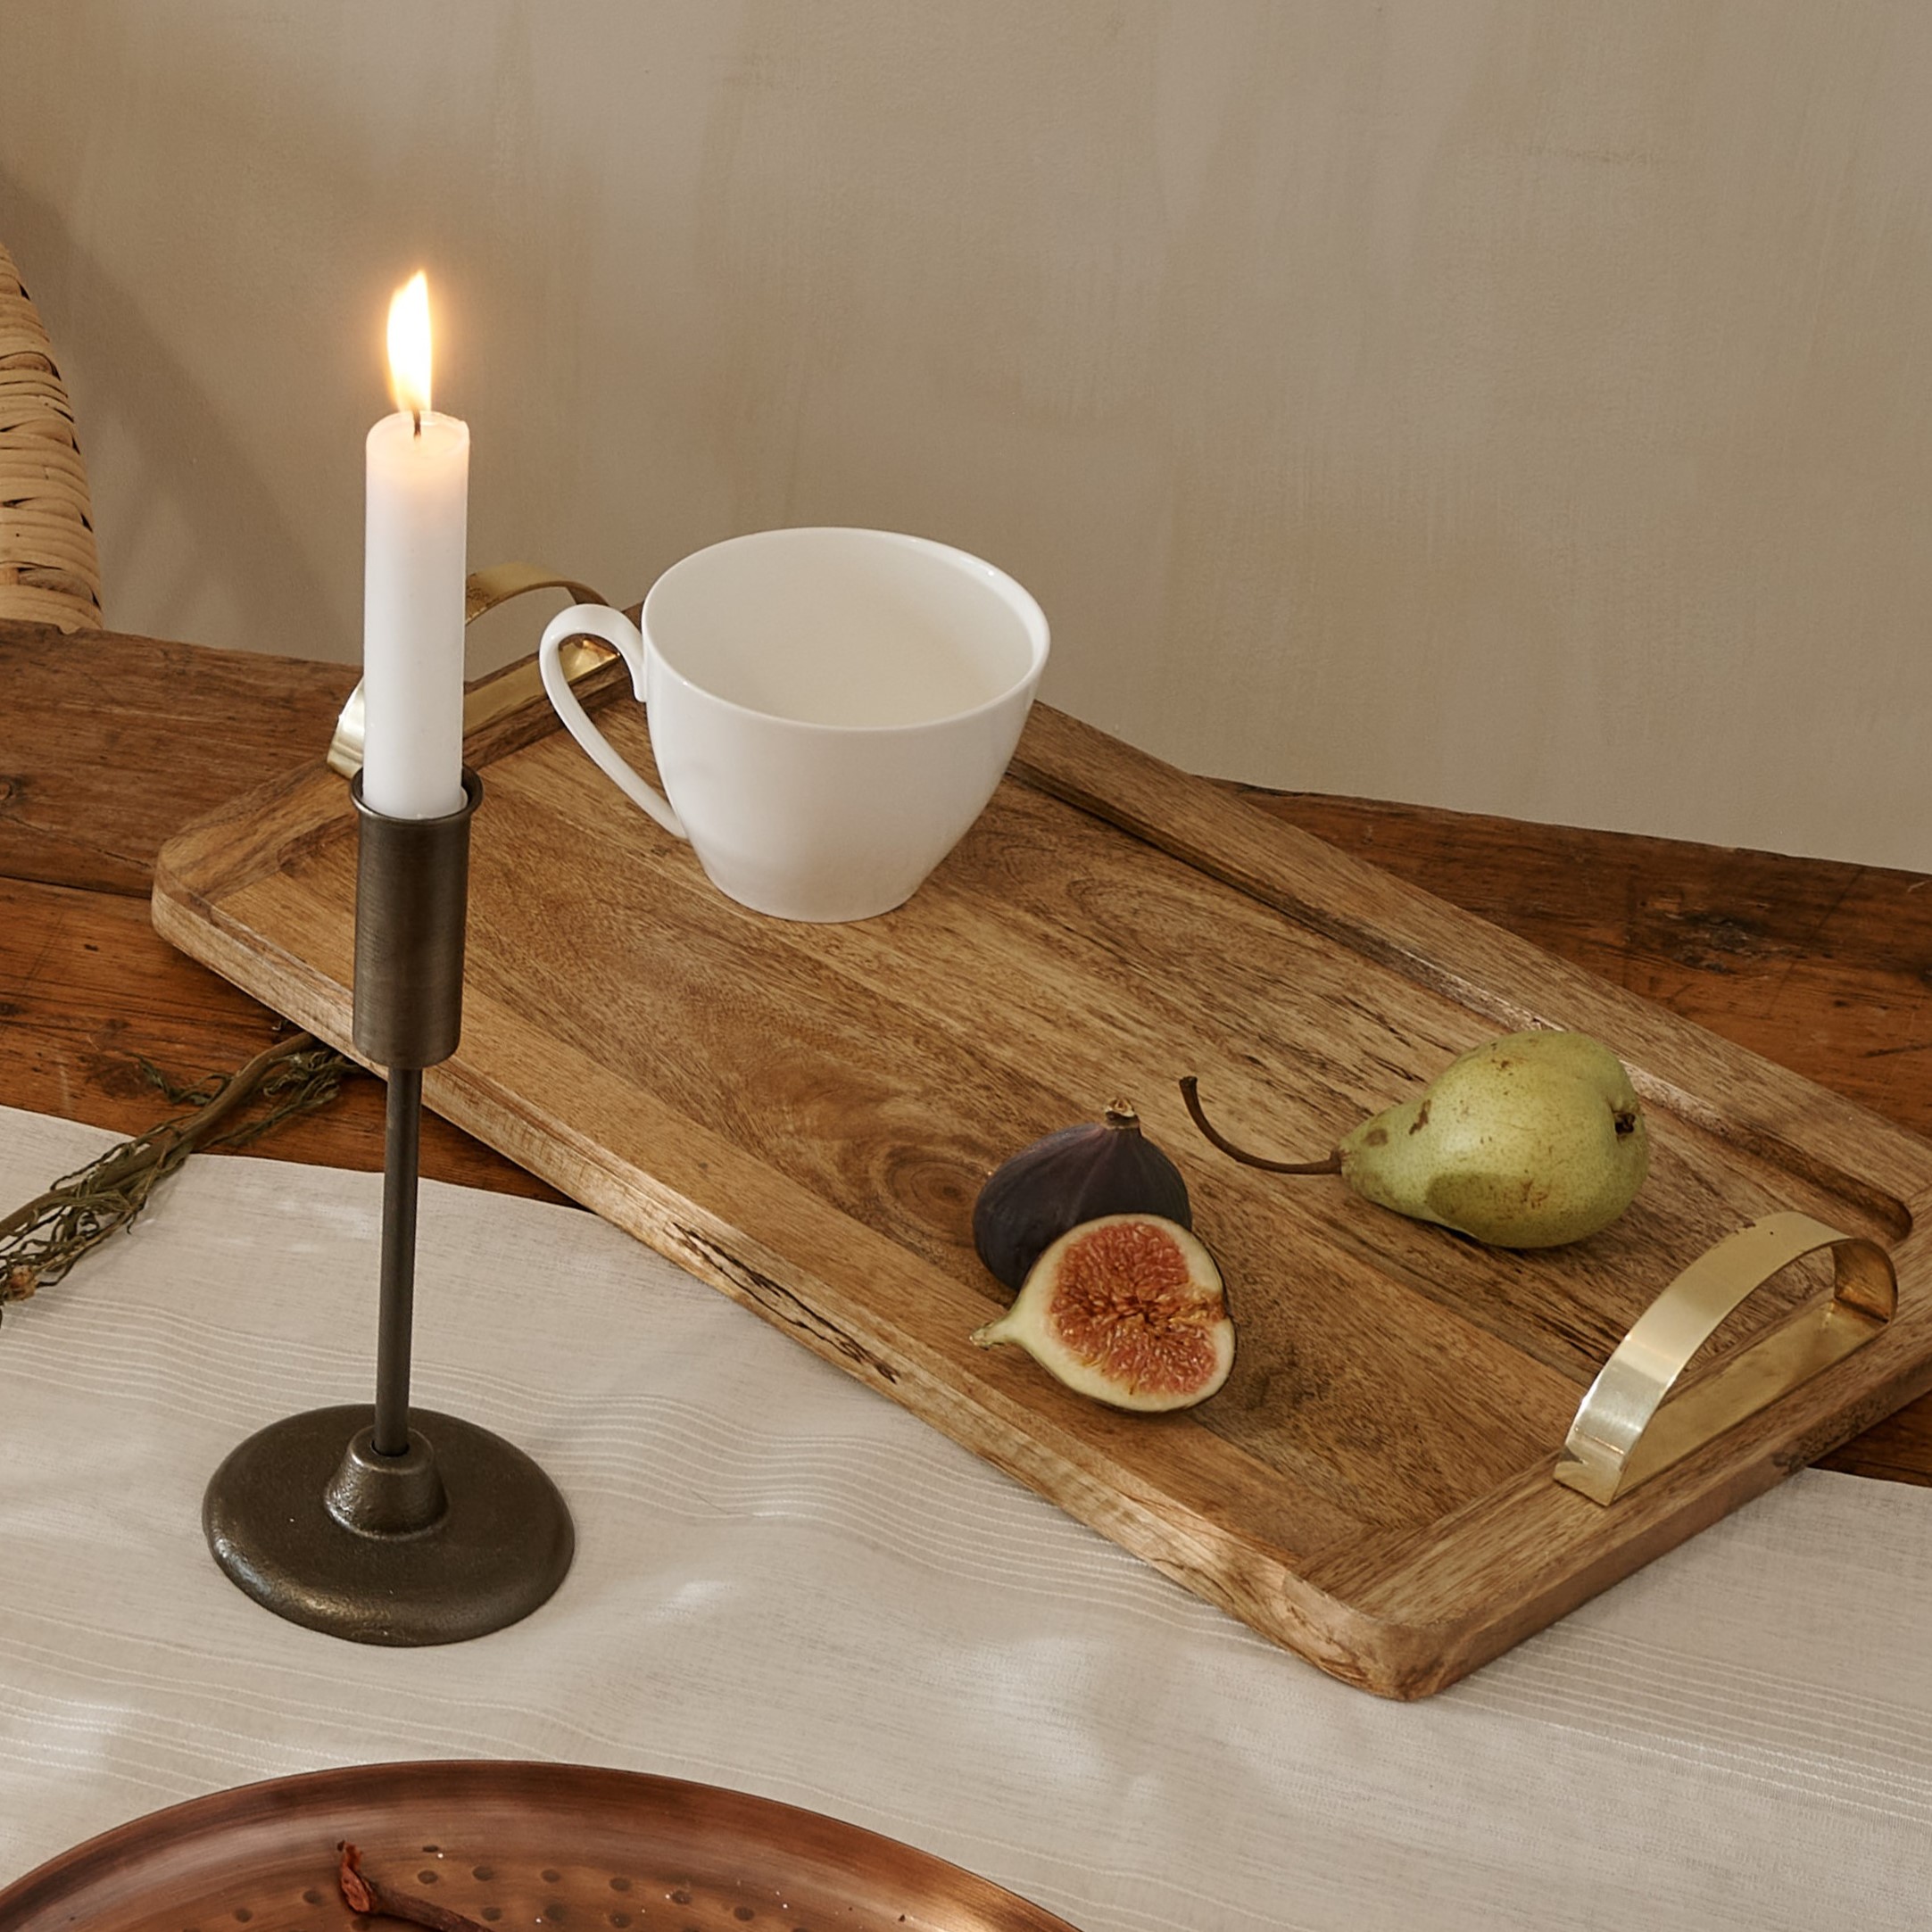 Wooden serving tray with copper handles on wooden table, with white mug and fruit, with antique copper candlestick with white candle